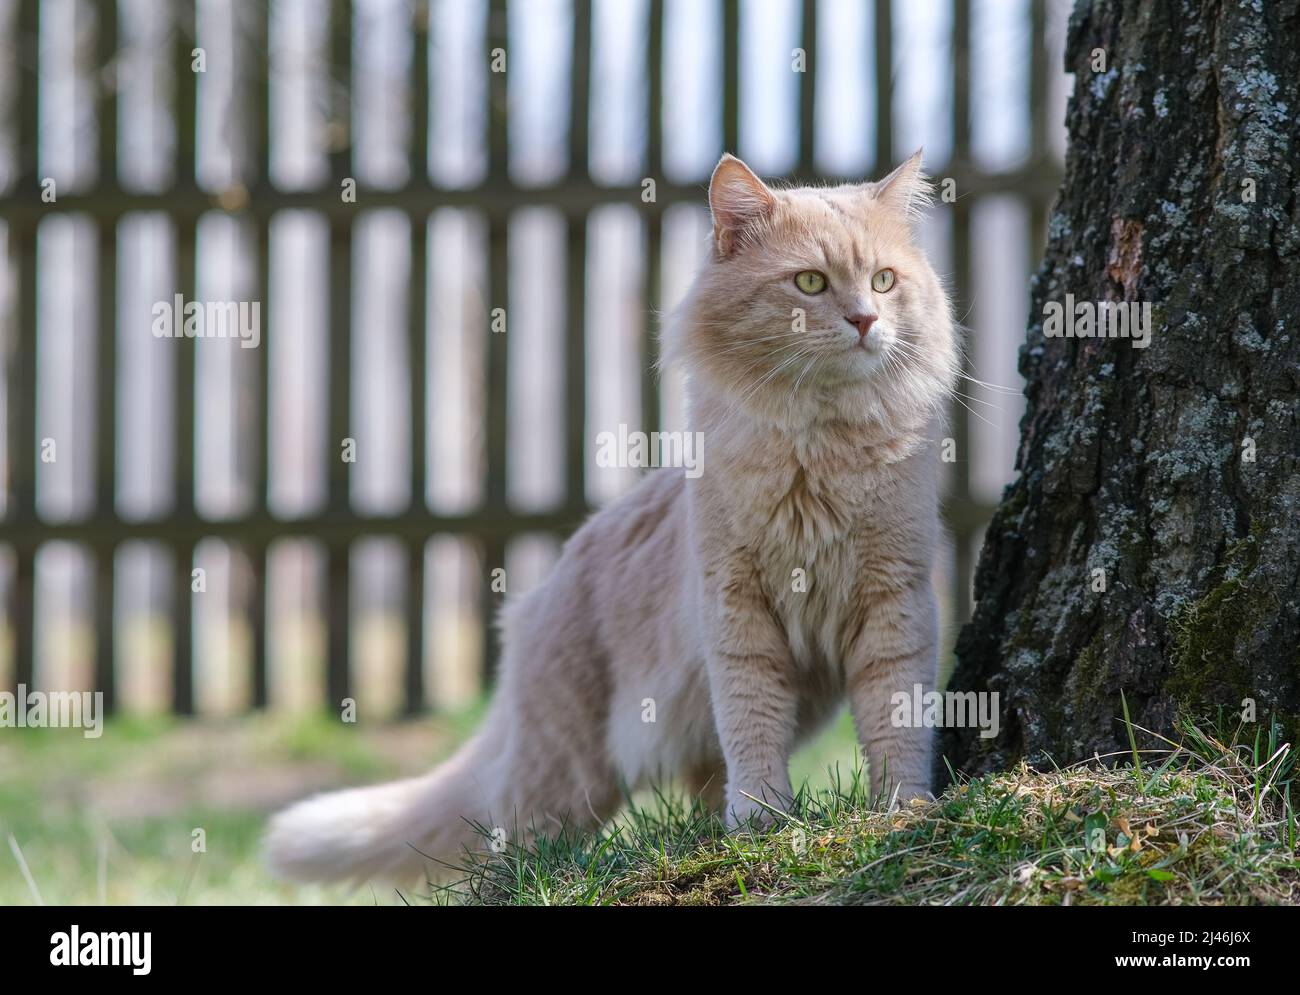 A light red fluffy cat is standing near a tree. Stock Photo